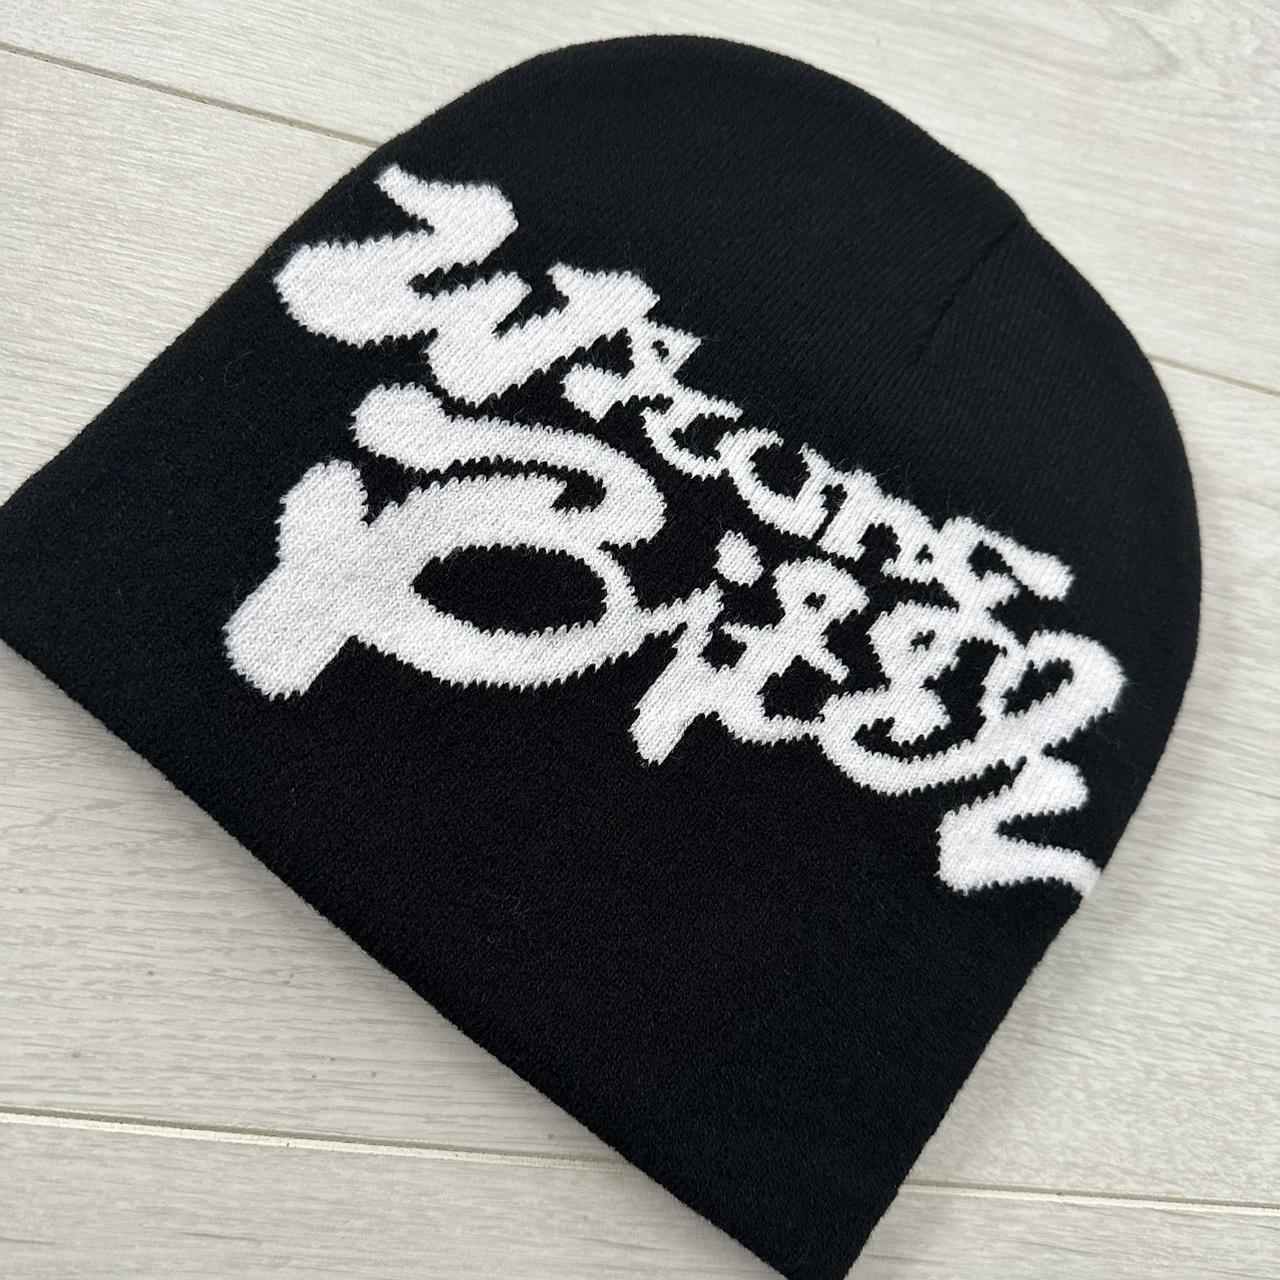 BLACK AND WHITE WRONG BEANIE BRAND NEW ONE SIZE... - Depop